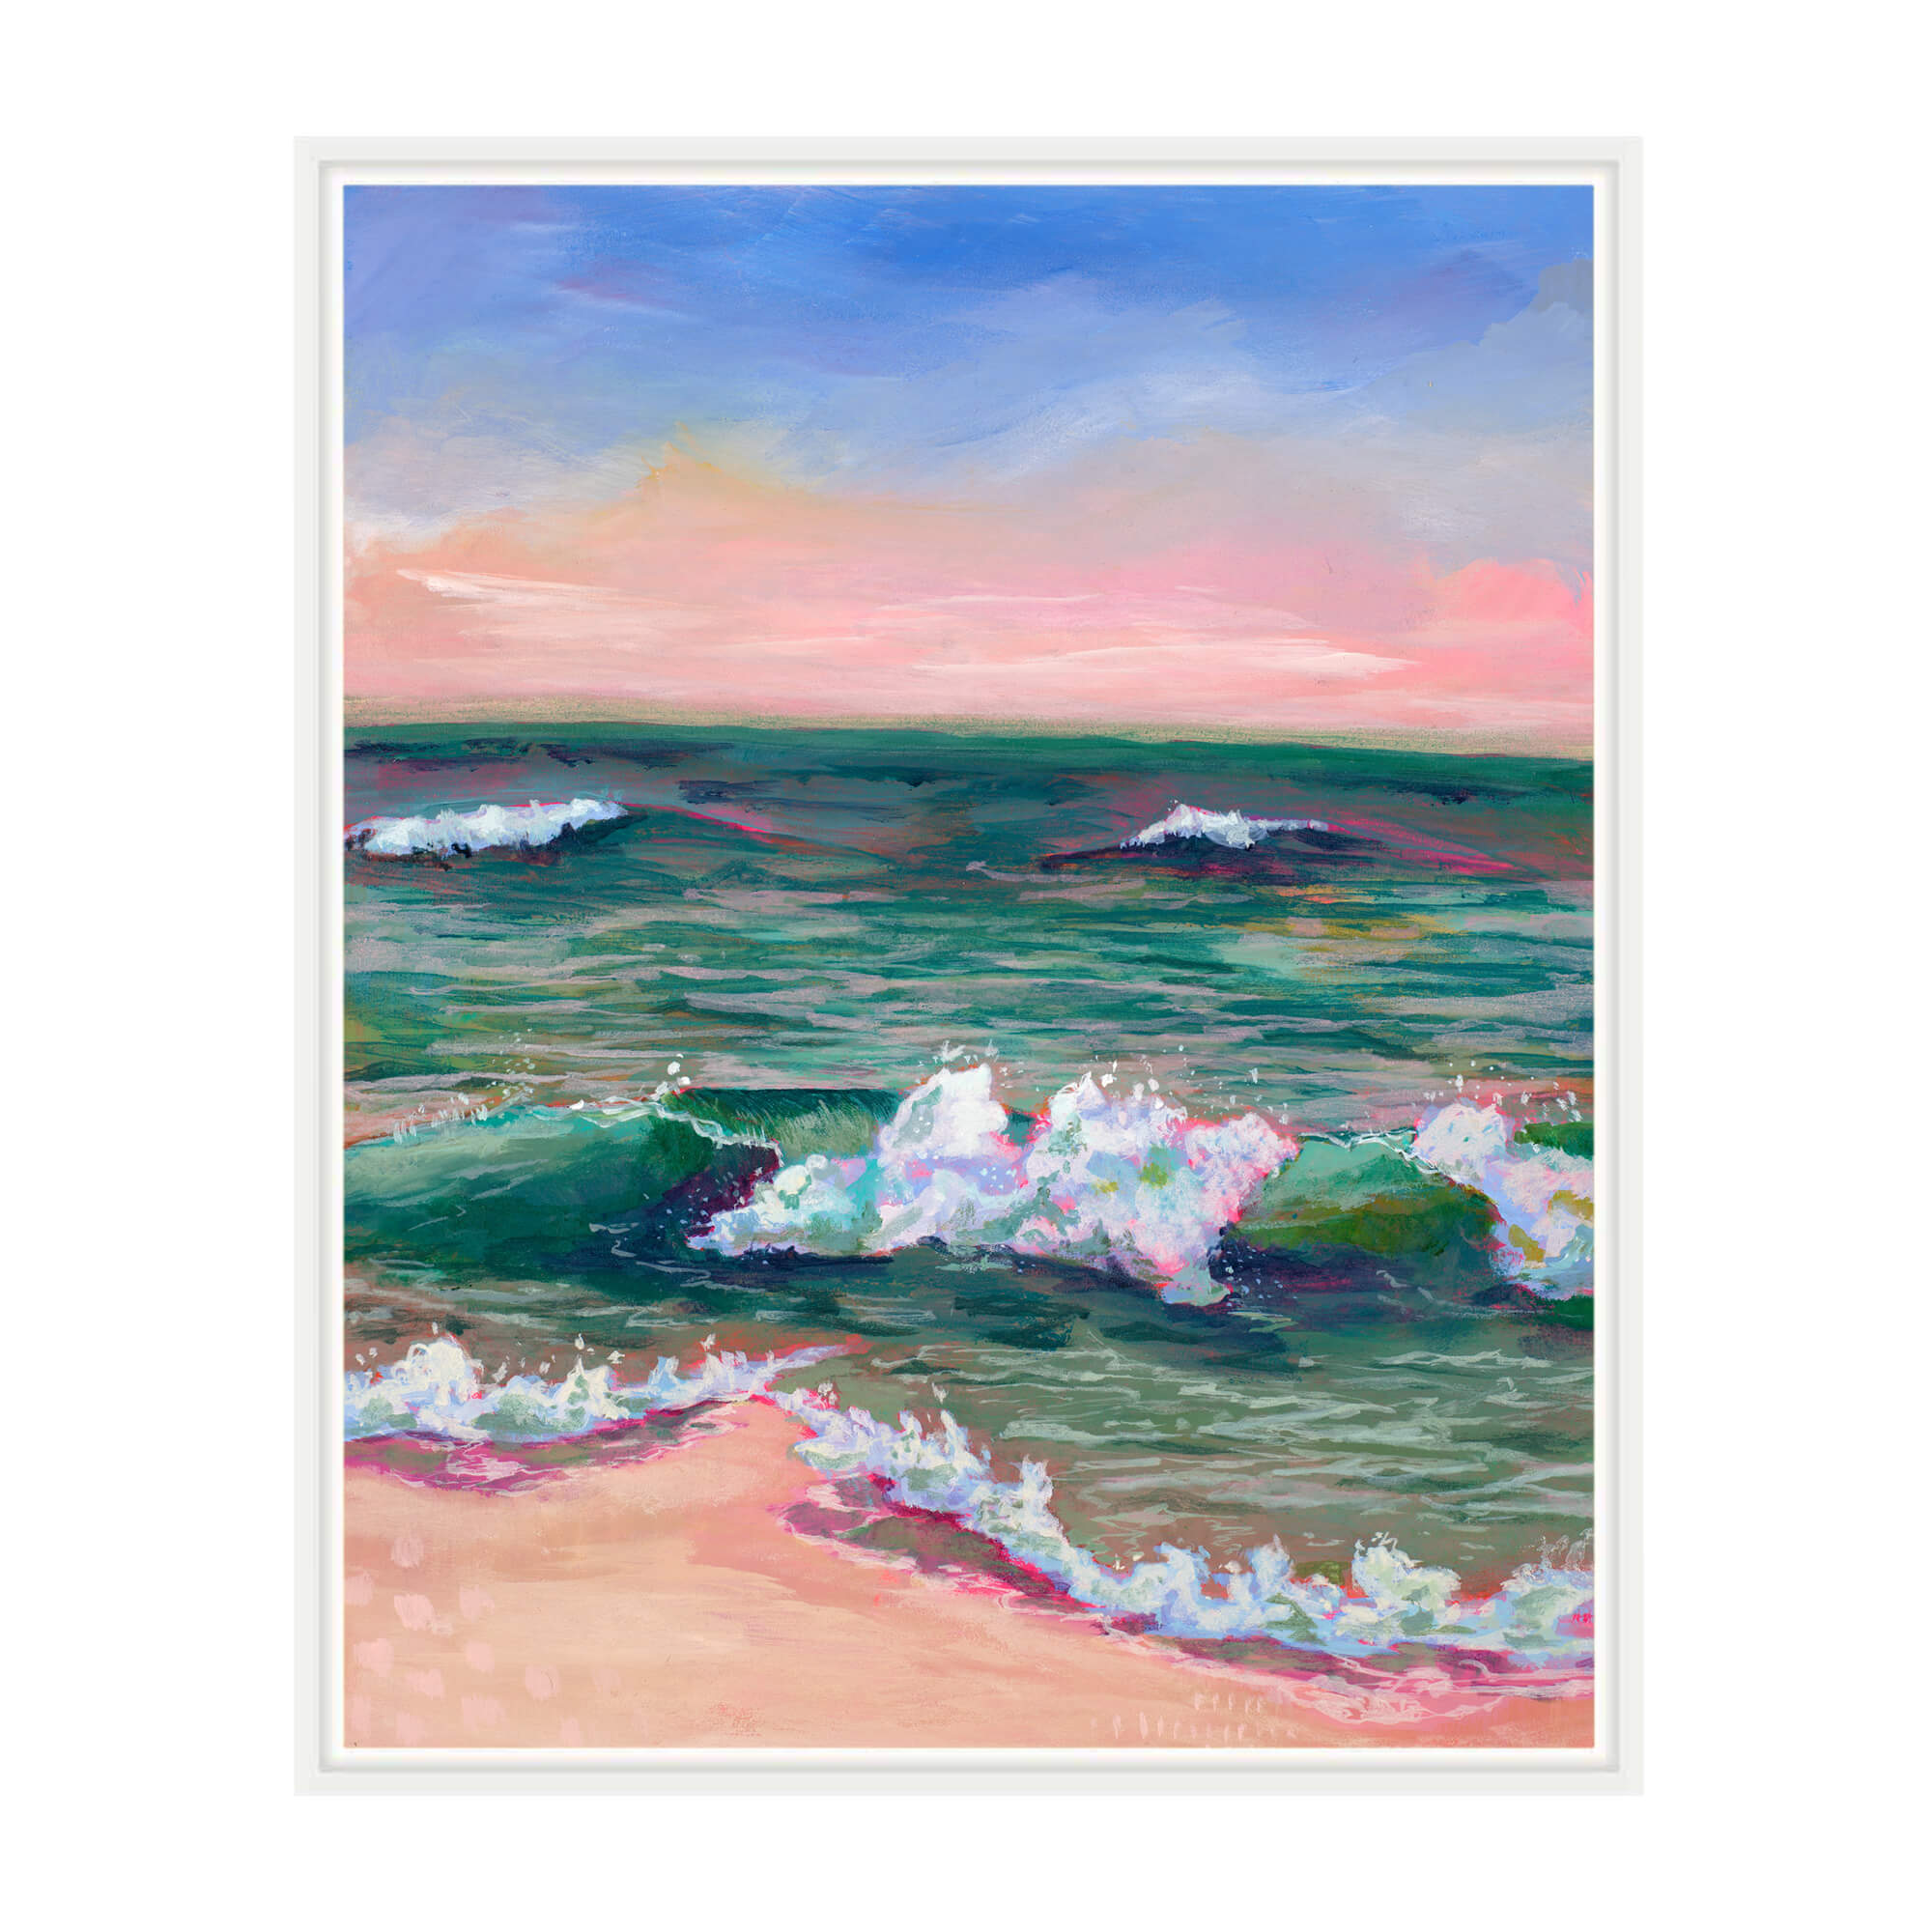 A seascape with emerald ocean water and pink hued sky by Hawaii artist Lindsay Wilkins